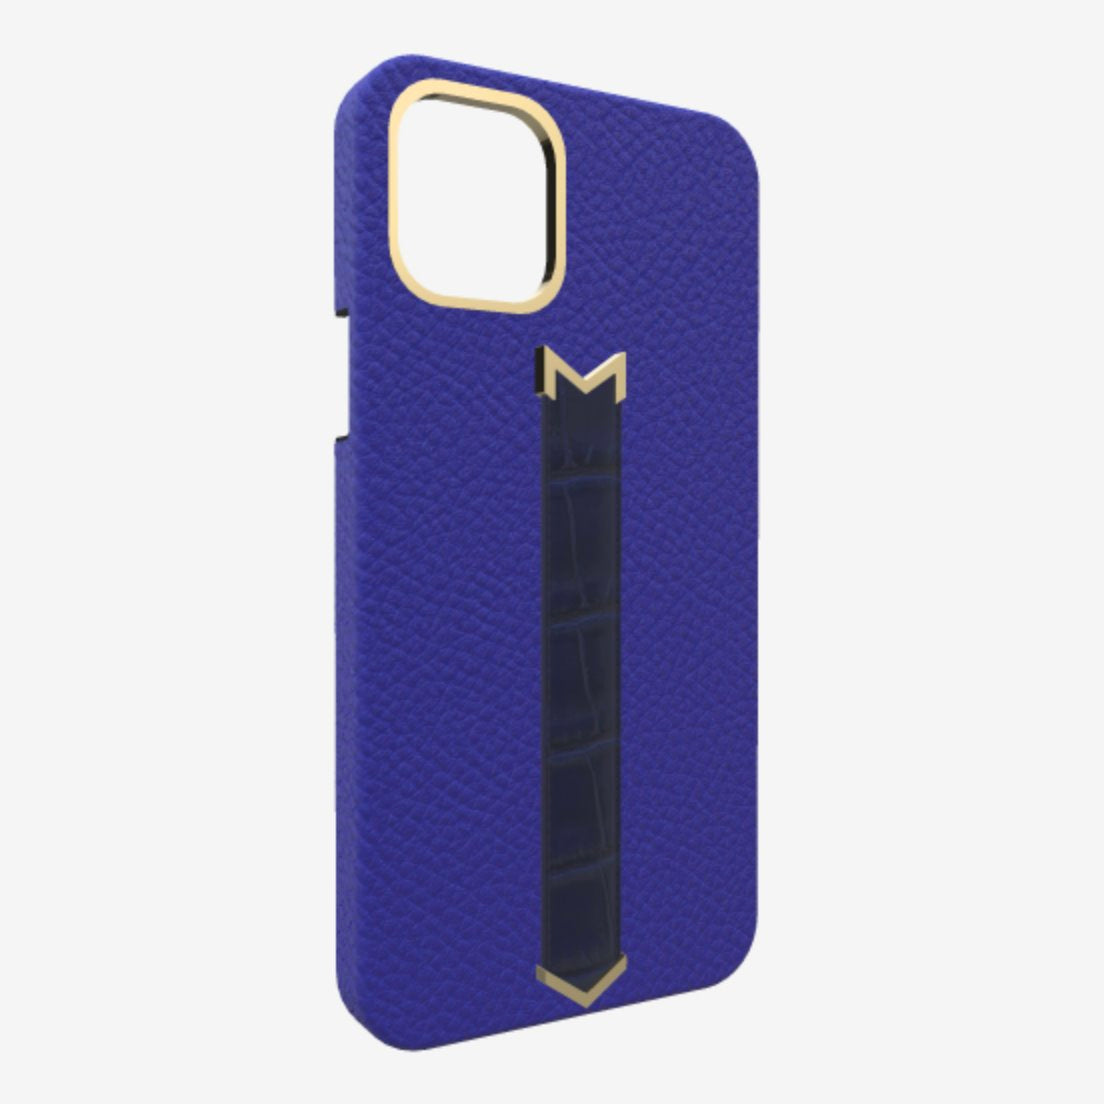 Gold Finger Strap Case for iPhone 13 Pro in Genuine Calfskin and Alligator Electric Blue Navy Blue 